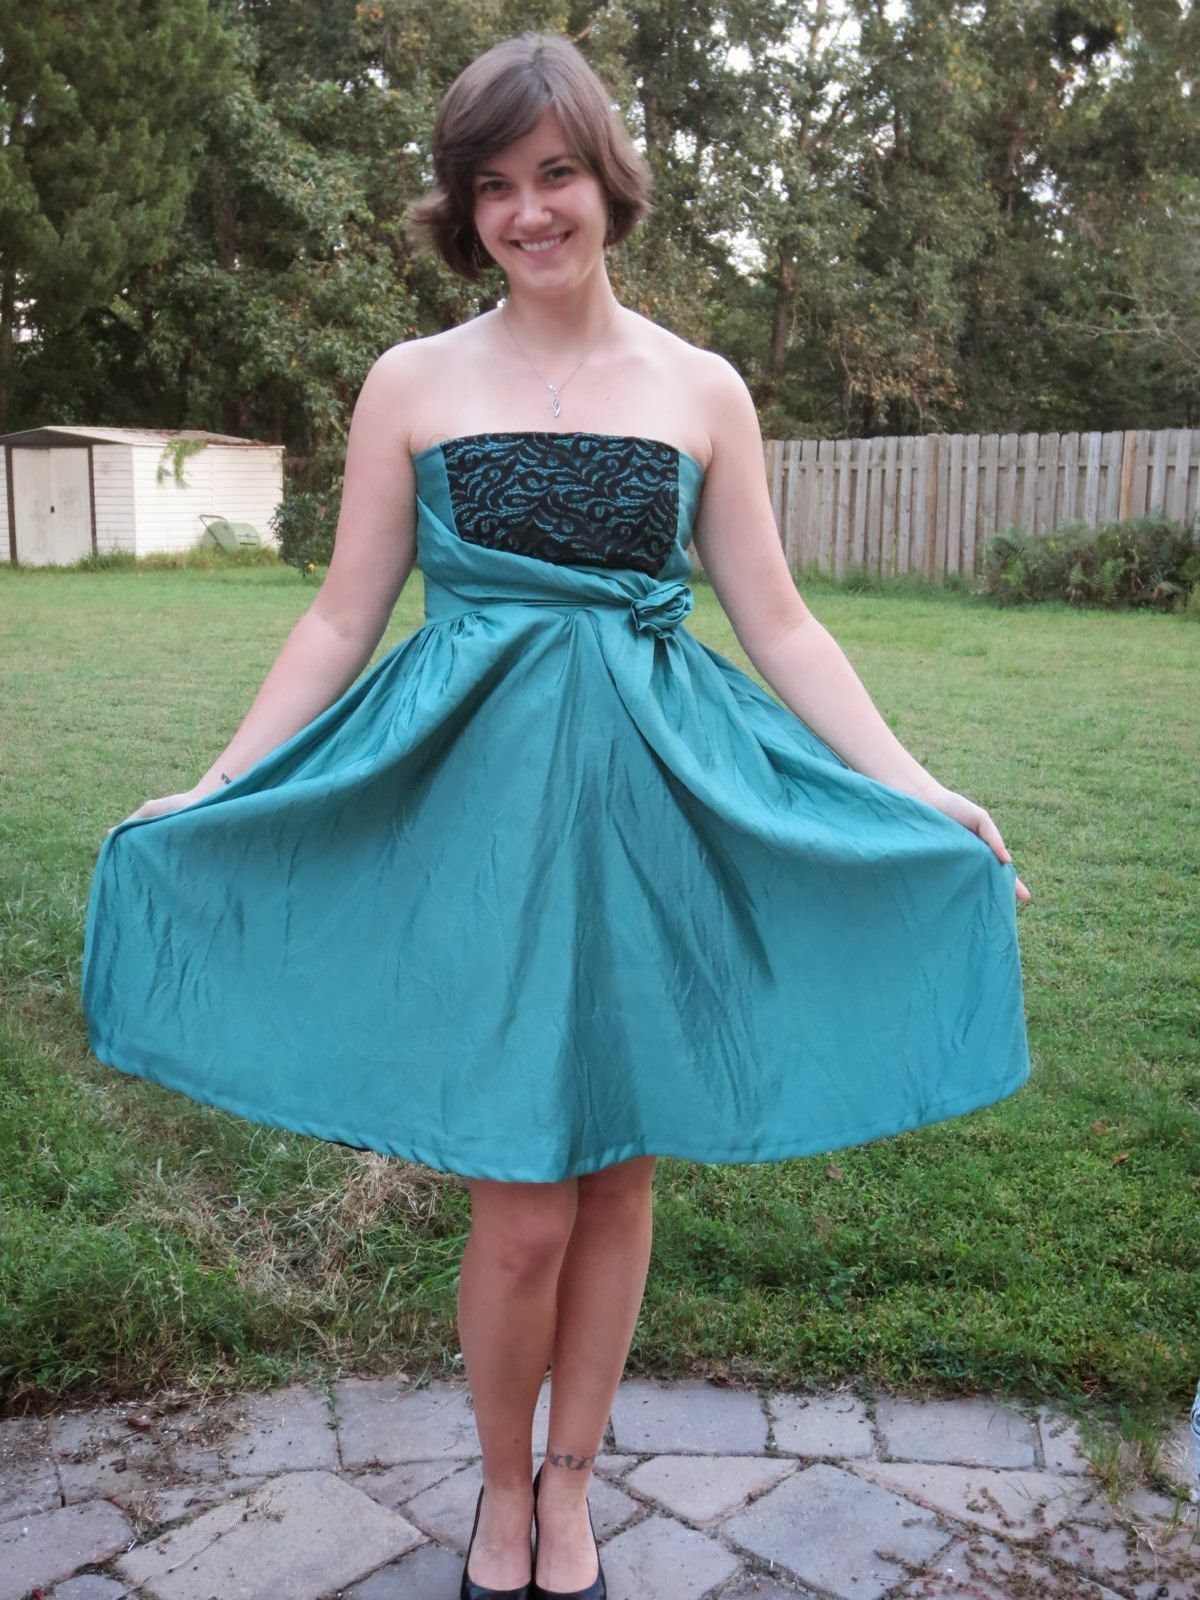 Stylish Sheets: Seal the Teal: Poufy to Spiffy Homecoming Dress Refashion